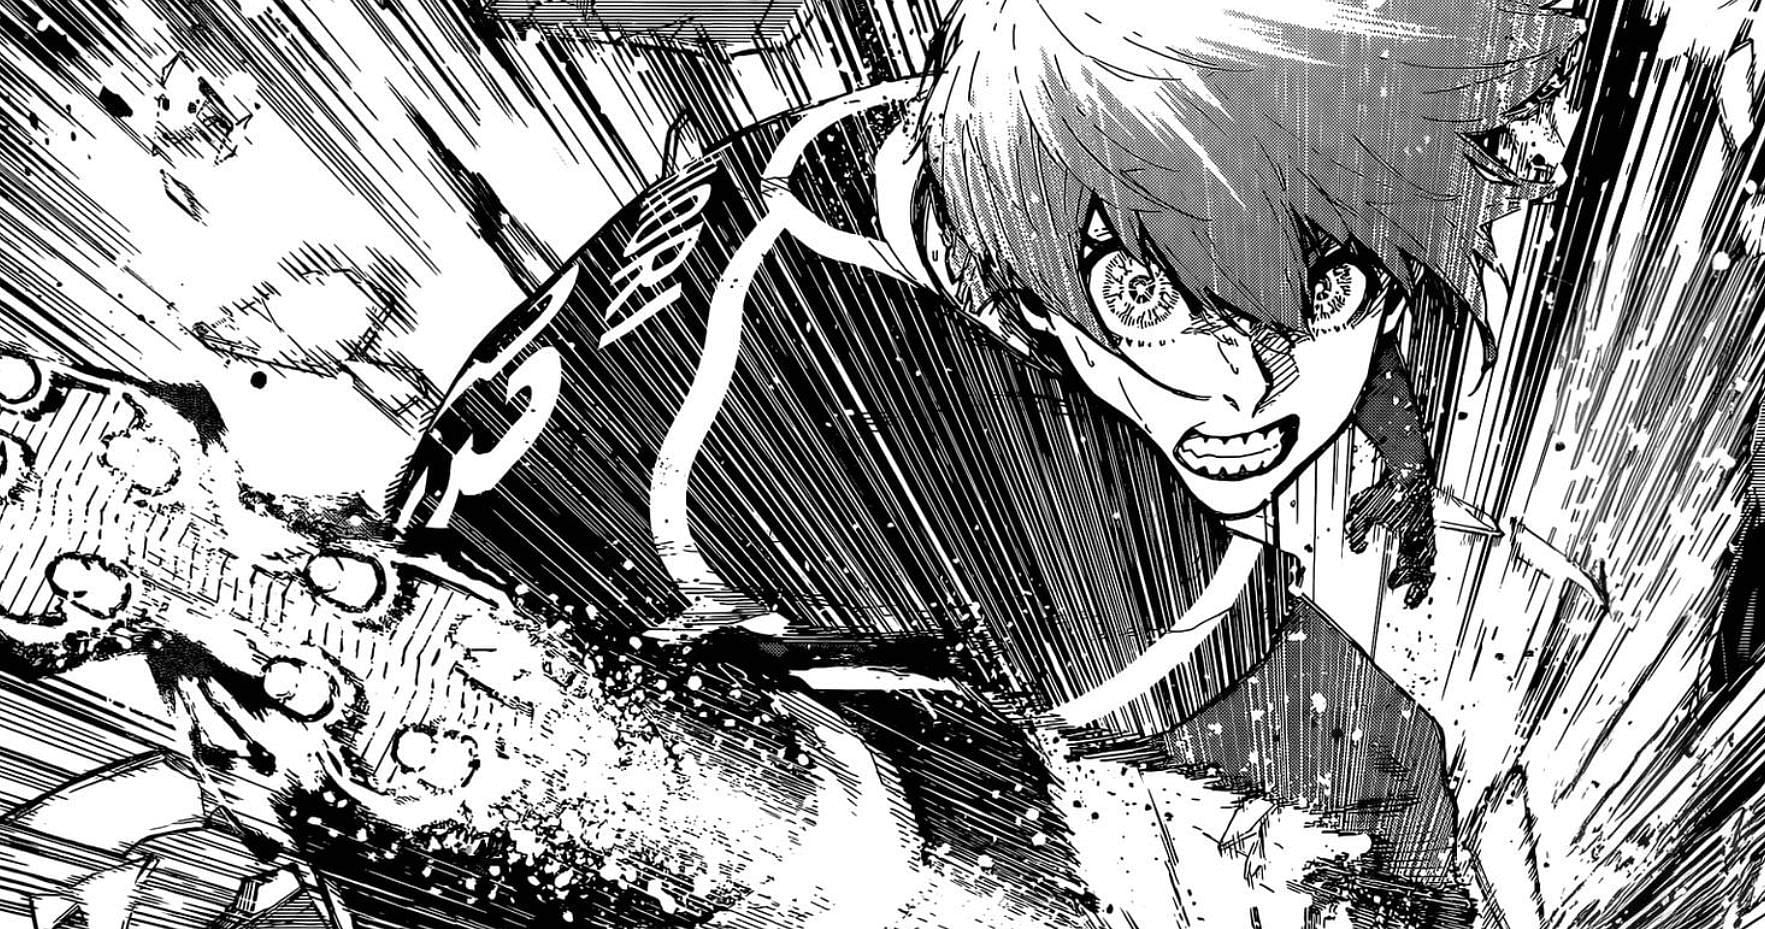 Blue Lock chapter 236: Exact release date and time, where to read, and more